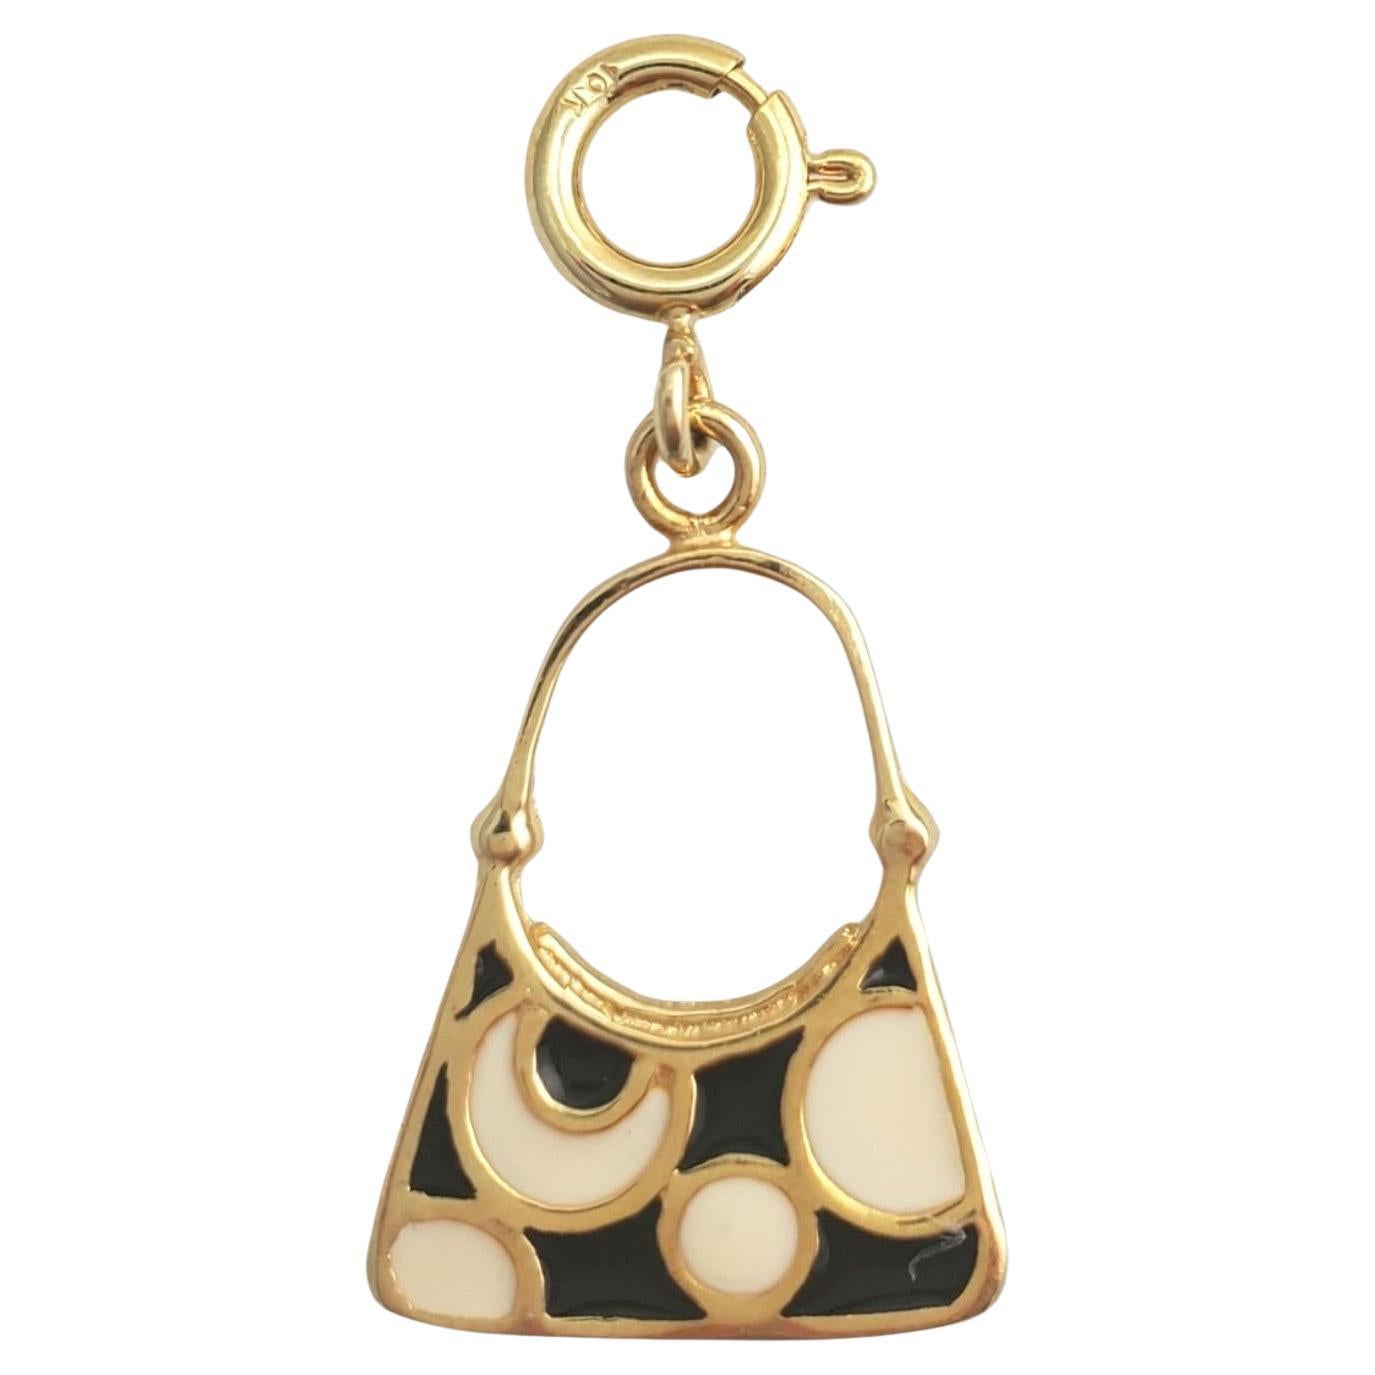 10K Yellow Gold and Enamel Purse Charm #16010 For Sale